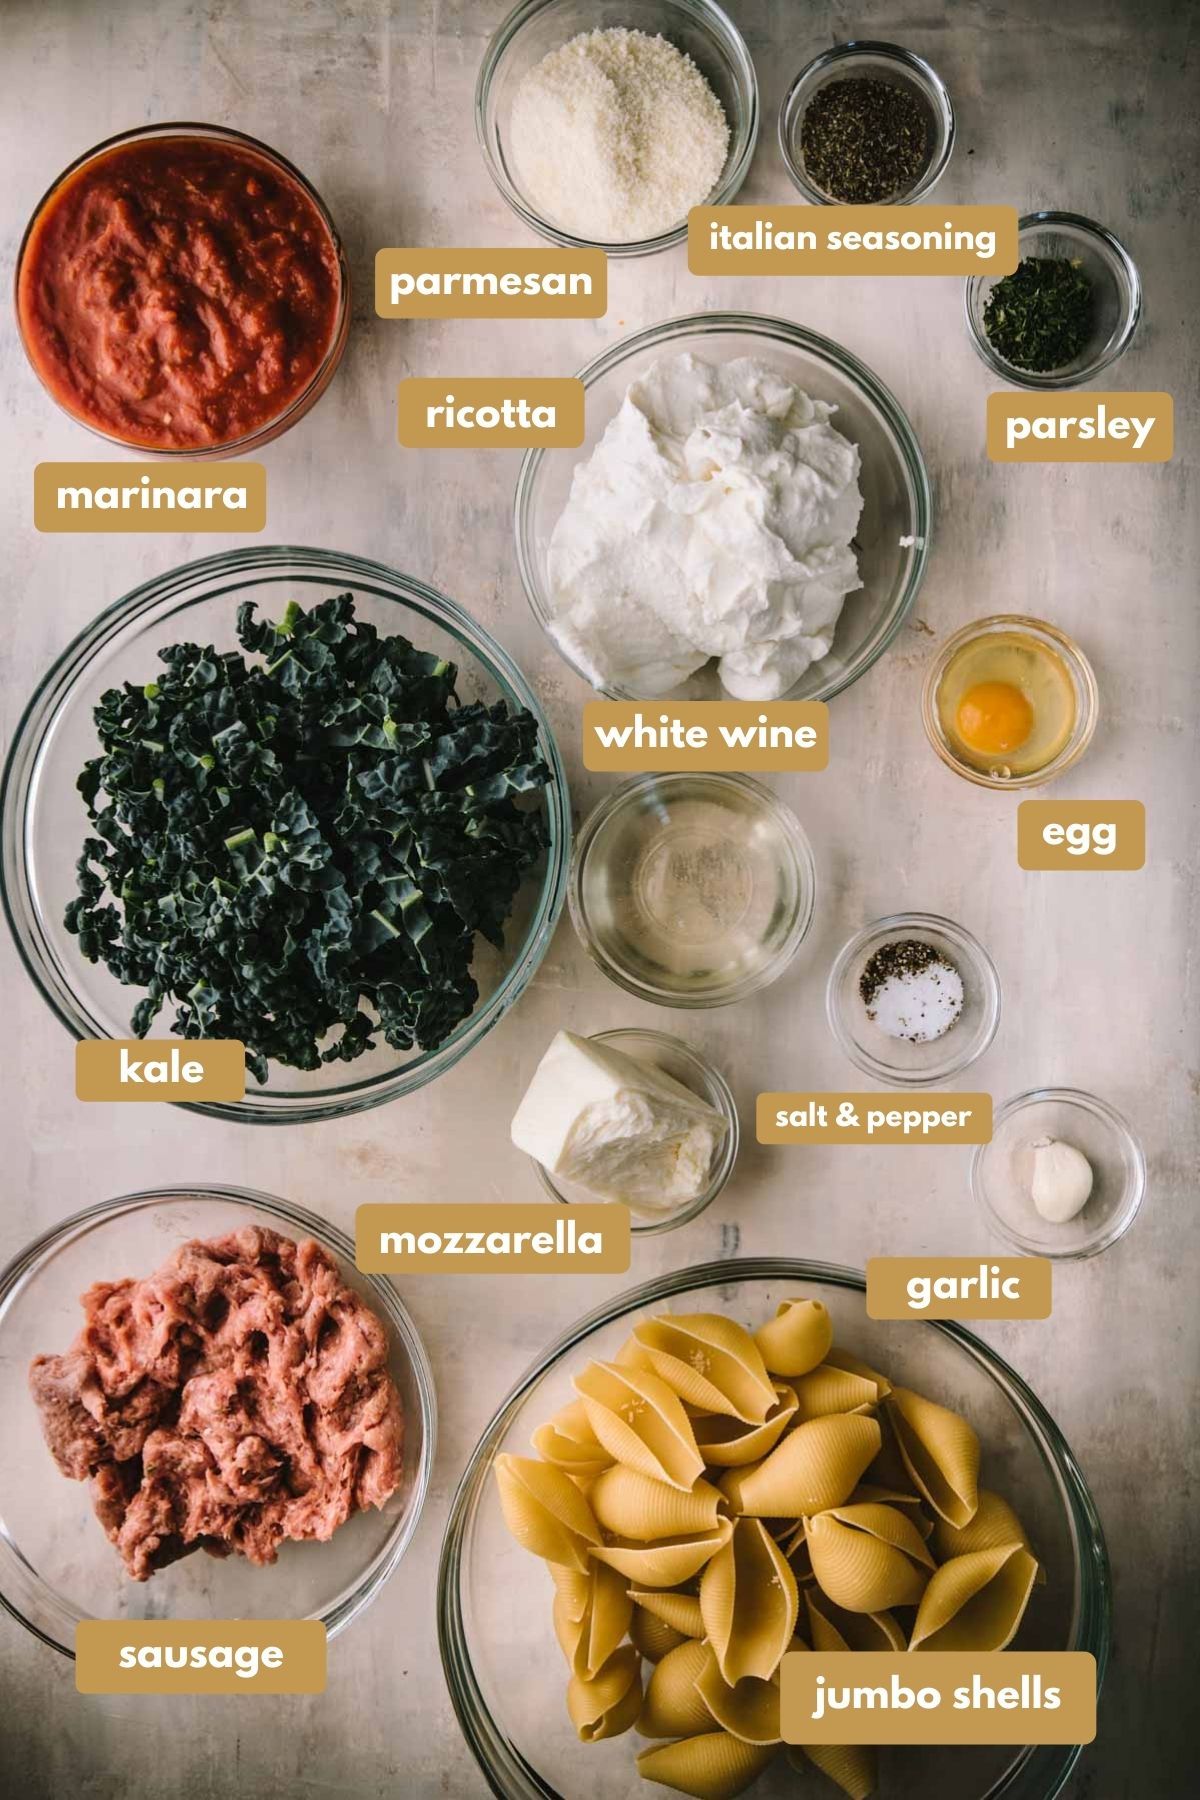 All the ingredients required to make ricotta stuffed shells in clear glass bowls with labels. There is marinara sauce, parmesan cheese, Italian seasoning, parsley, ricotta, an egg, white wine, kale, salt and pepper, mozzarella, garlic, sausage meat and jumbo pasta shells